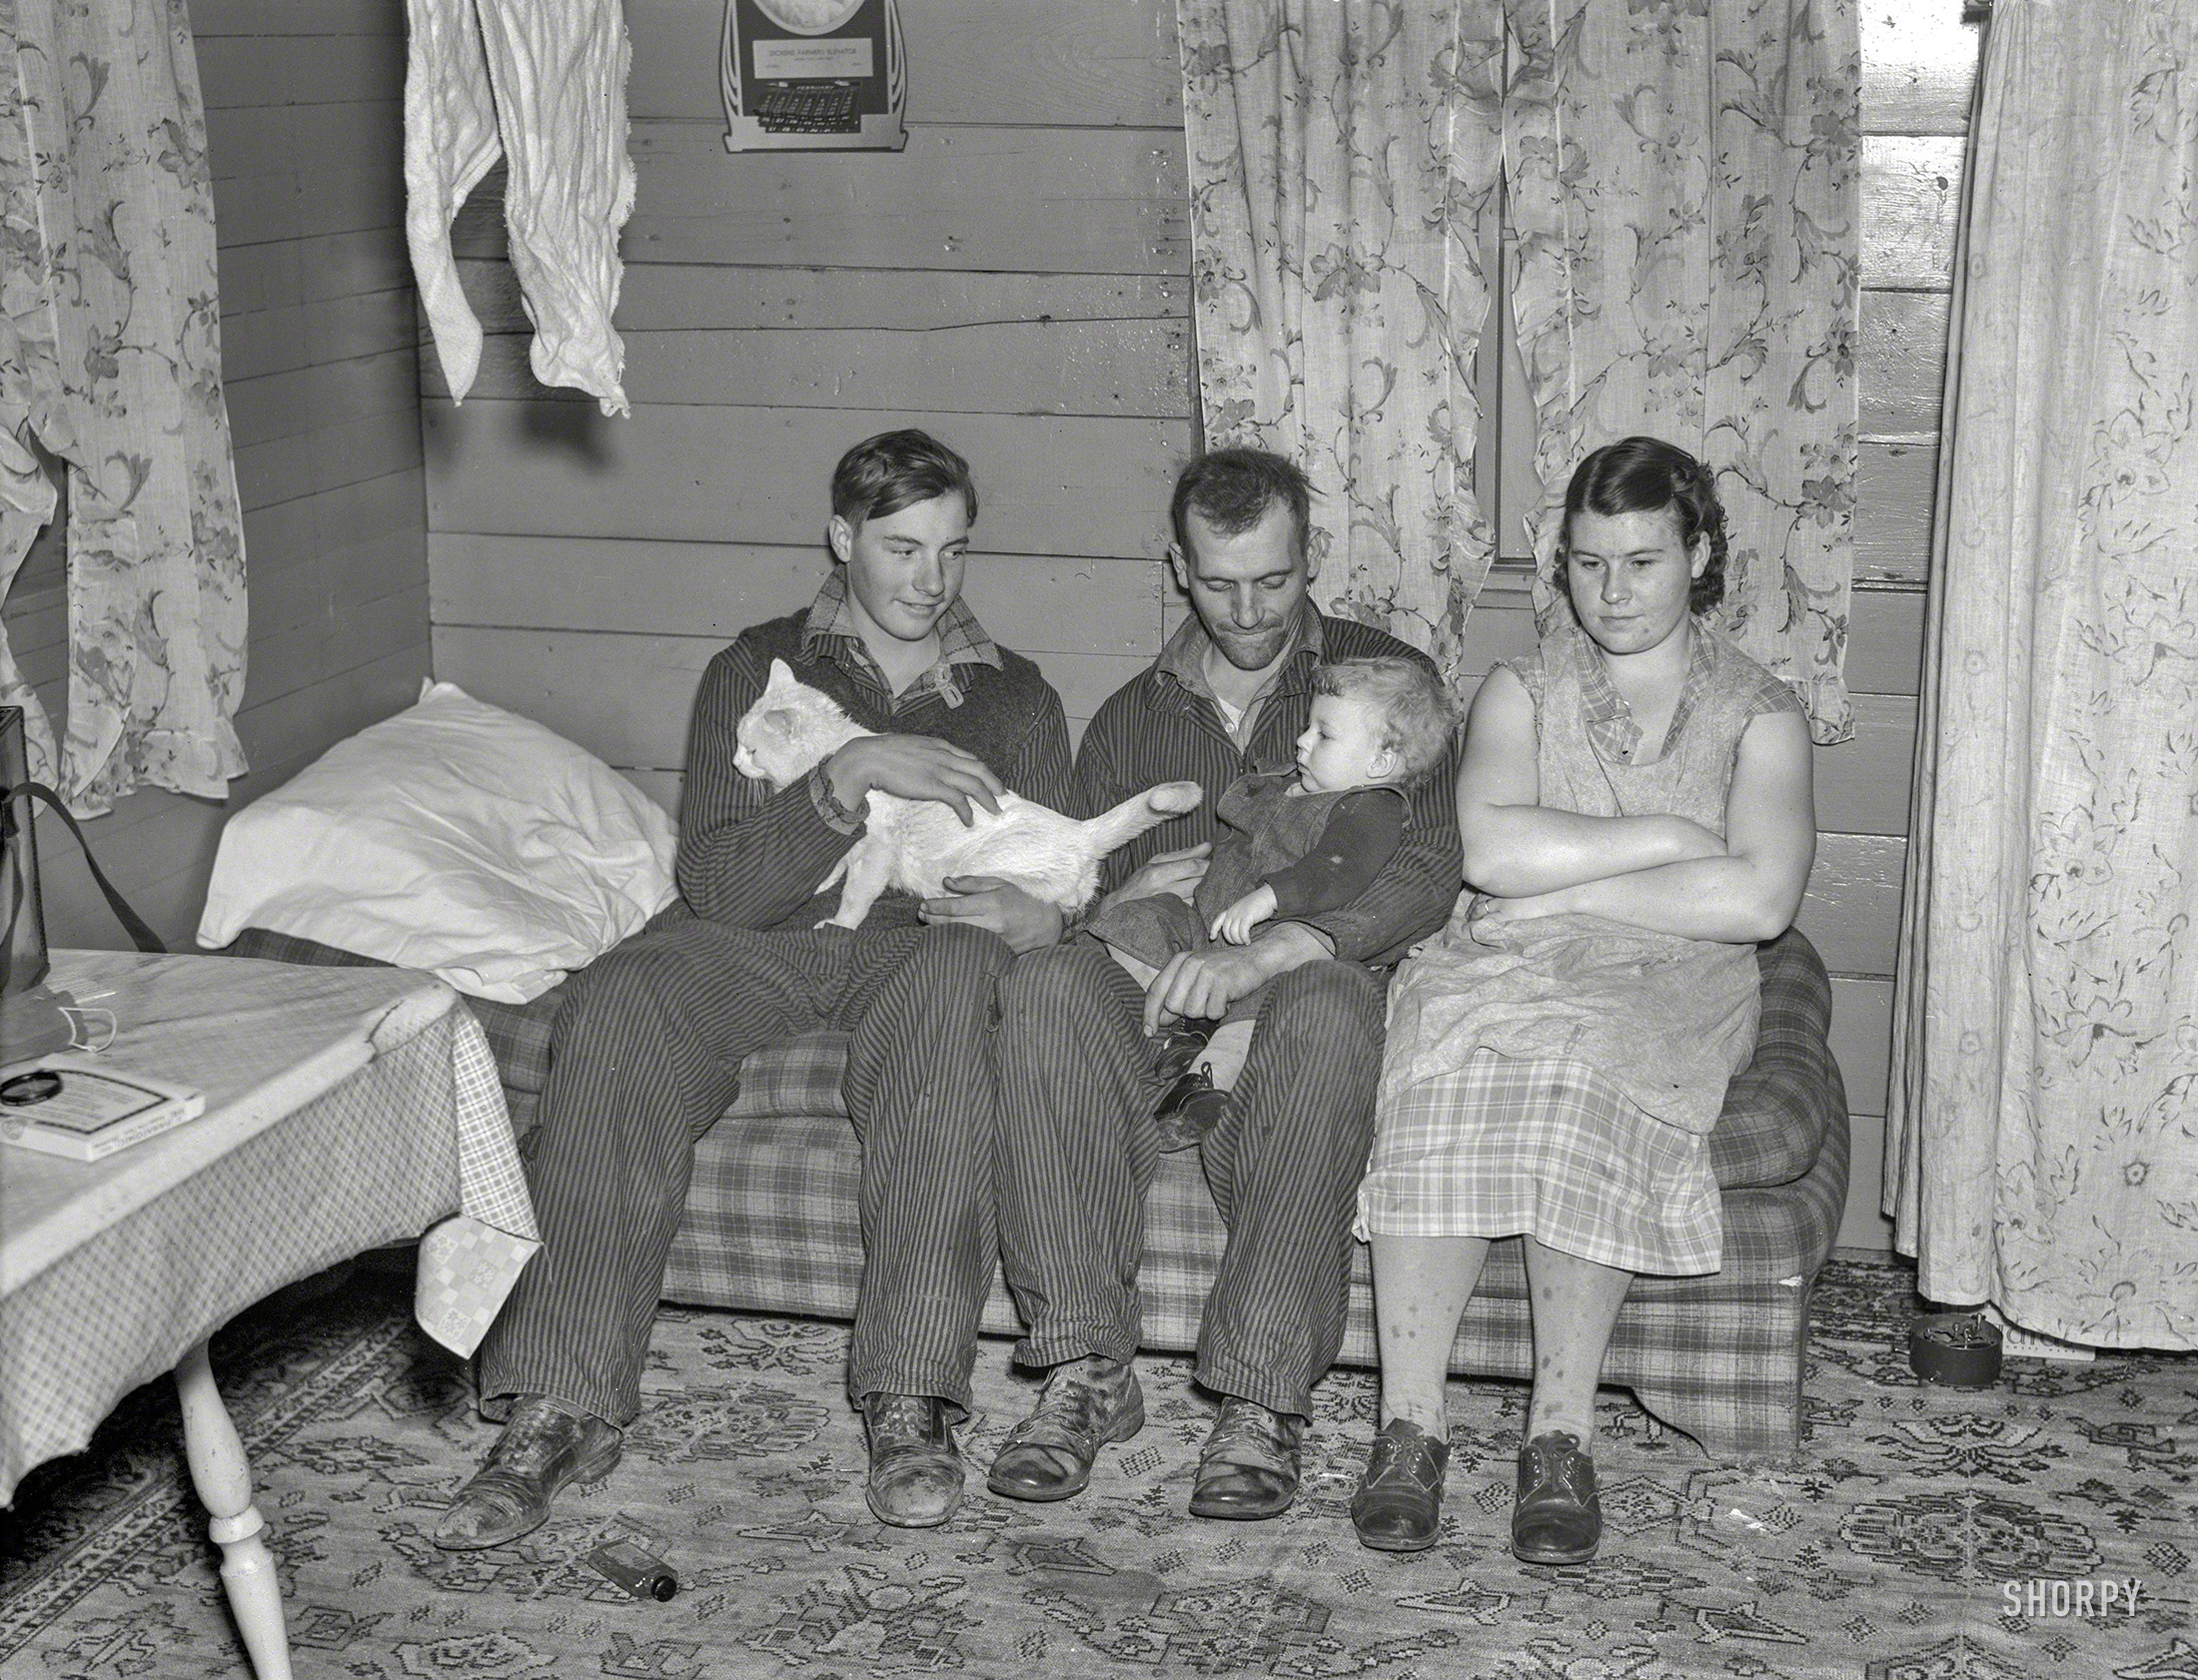 December 1936. "William Helmke, wife, baby, and brother live in one-room shack on ninety-acre farm near Dickens, Iowa, owned by lawyer." Medium format negative by Russell Lee for the Resettlement Administration. View full size.